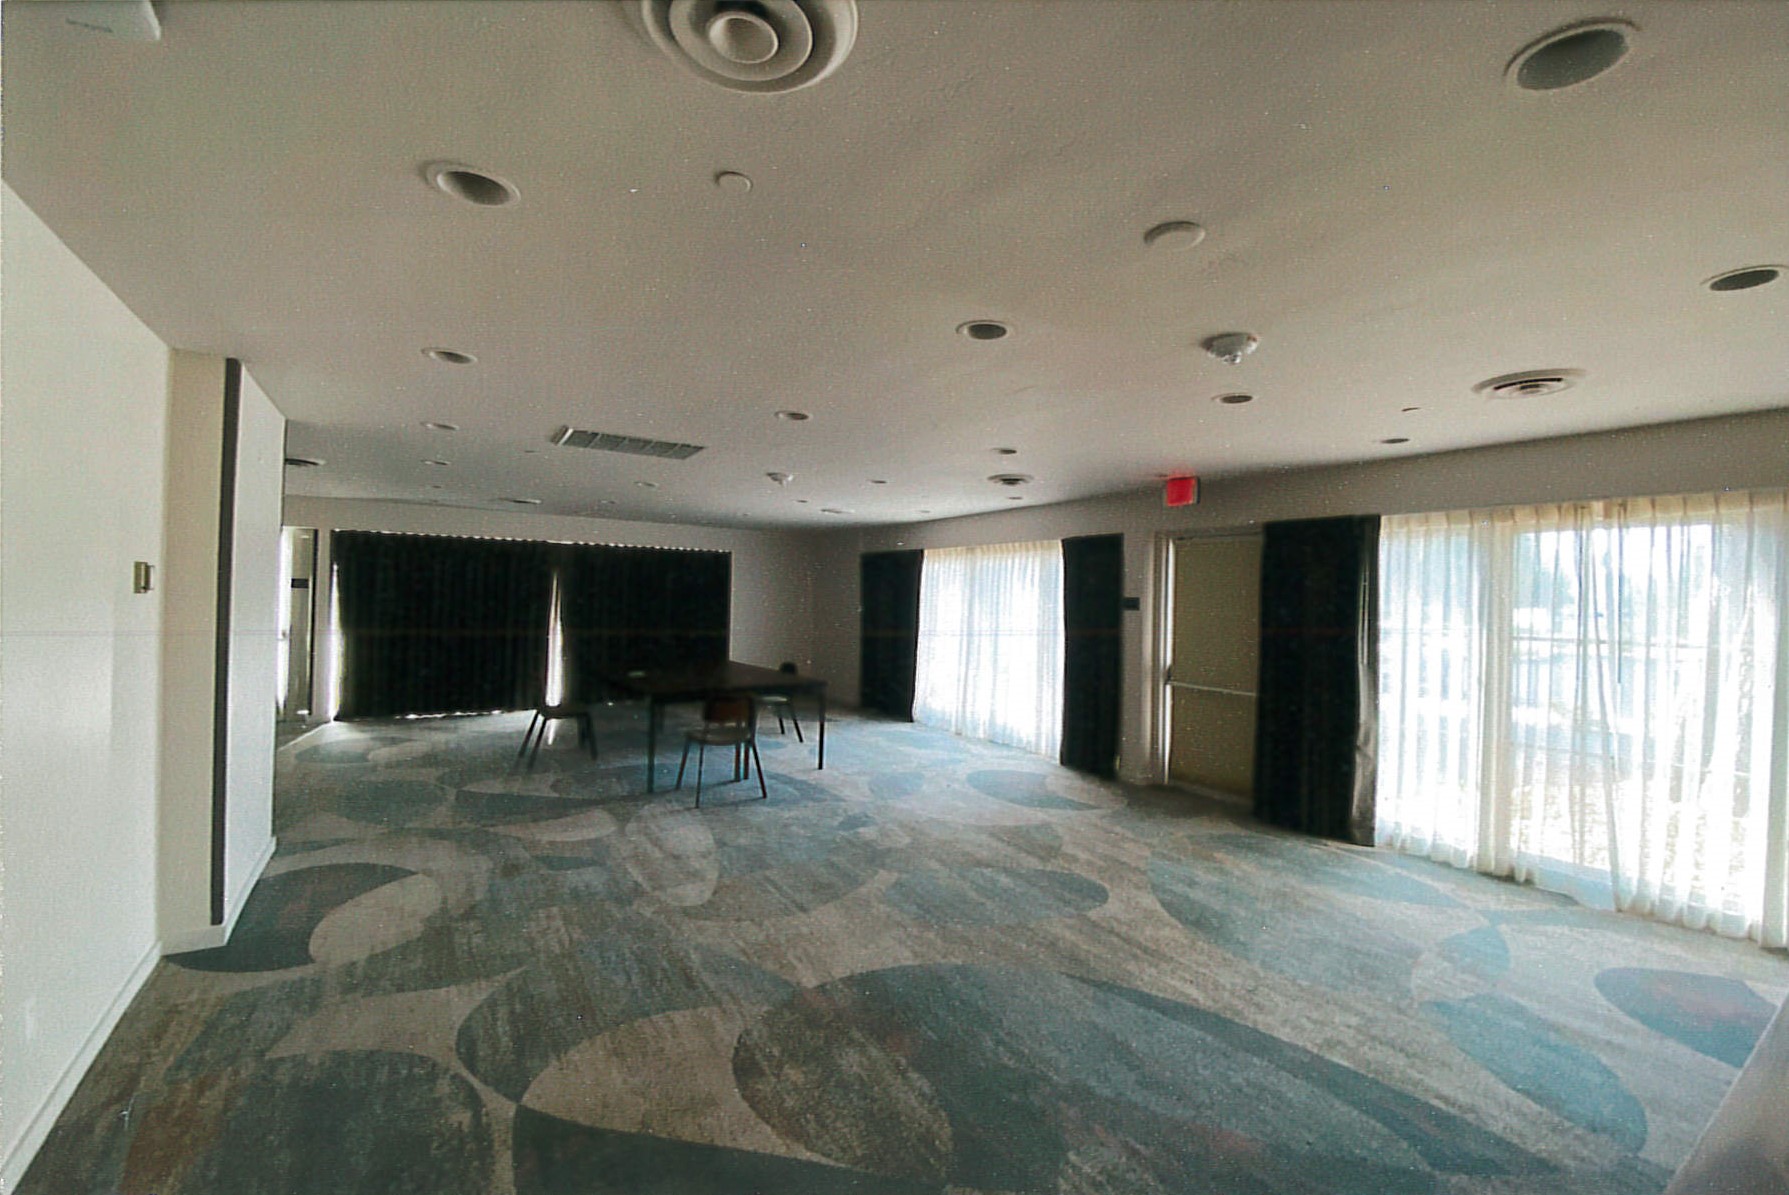 Renovated resort conference room, the 